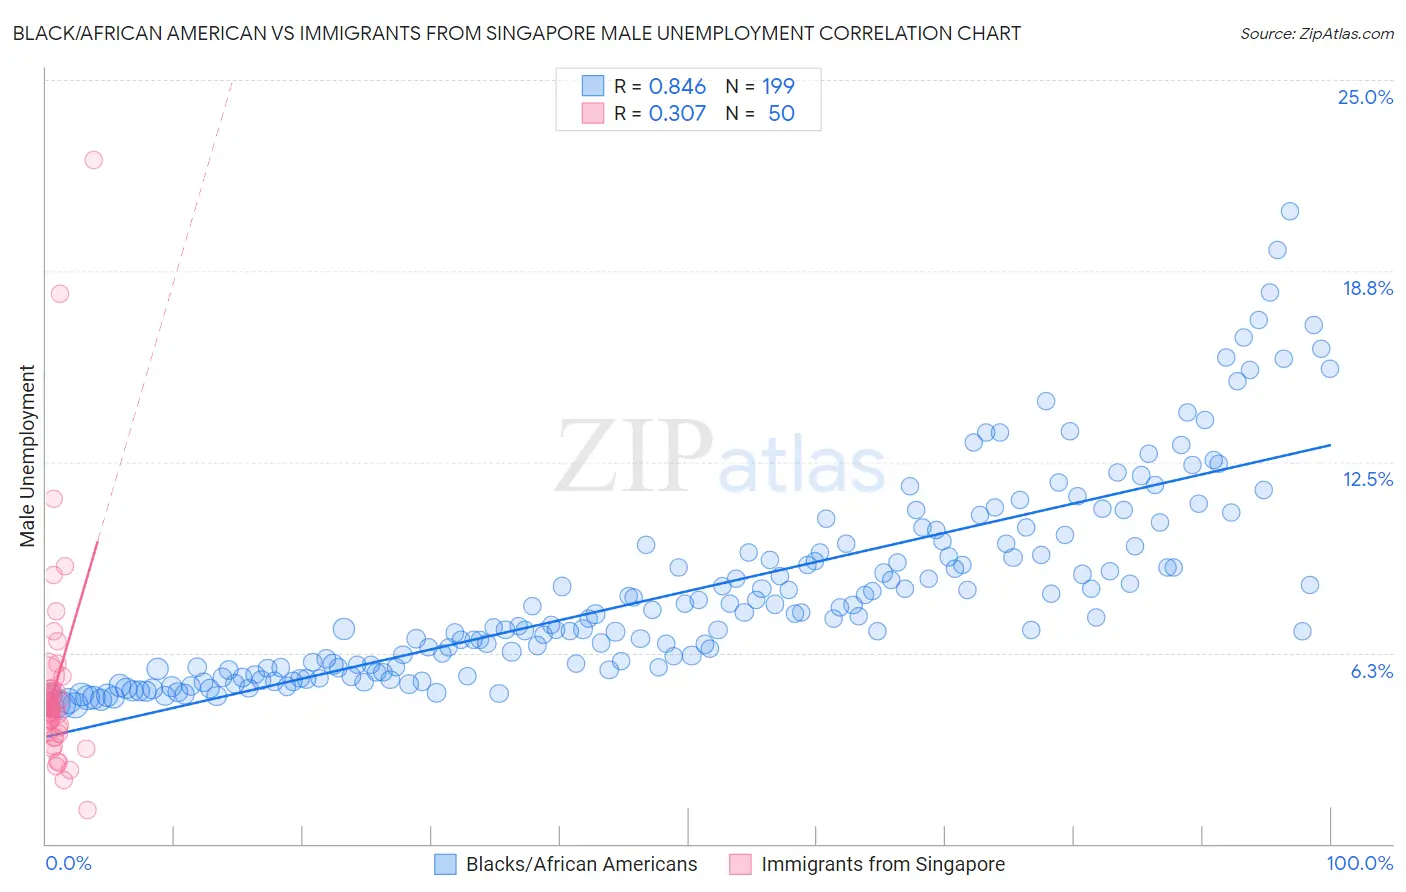 Black/African American vs Immigrants from Singapore Male Unemployment